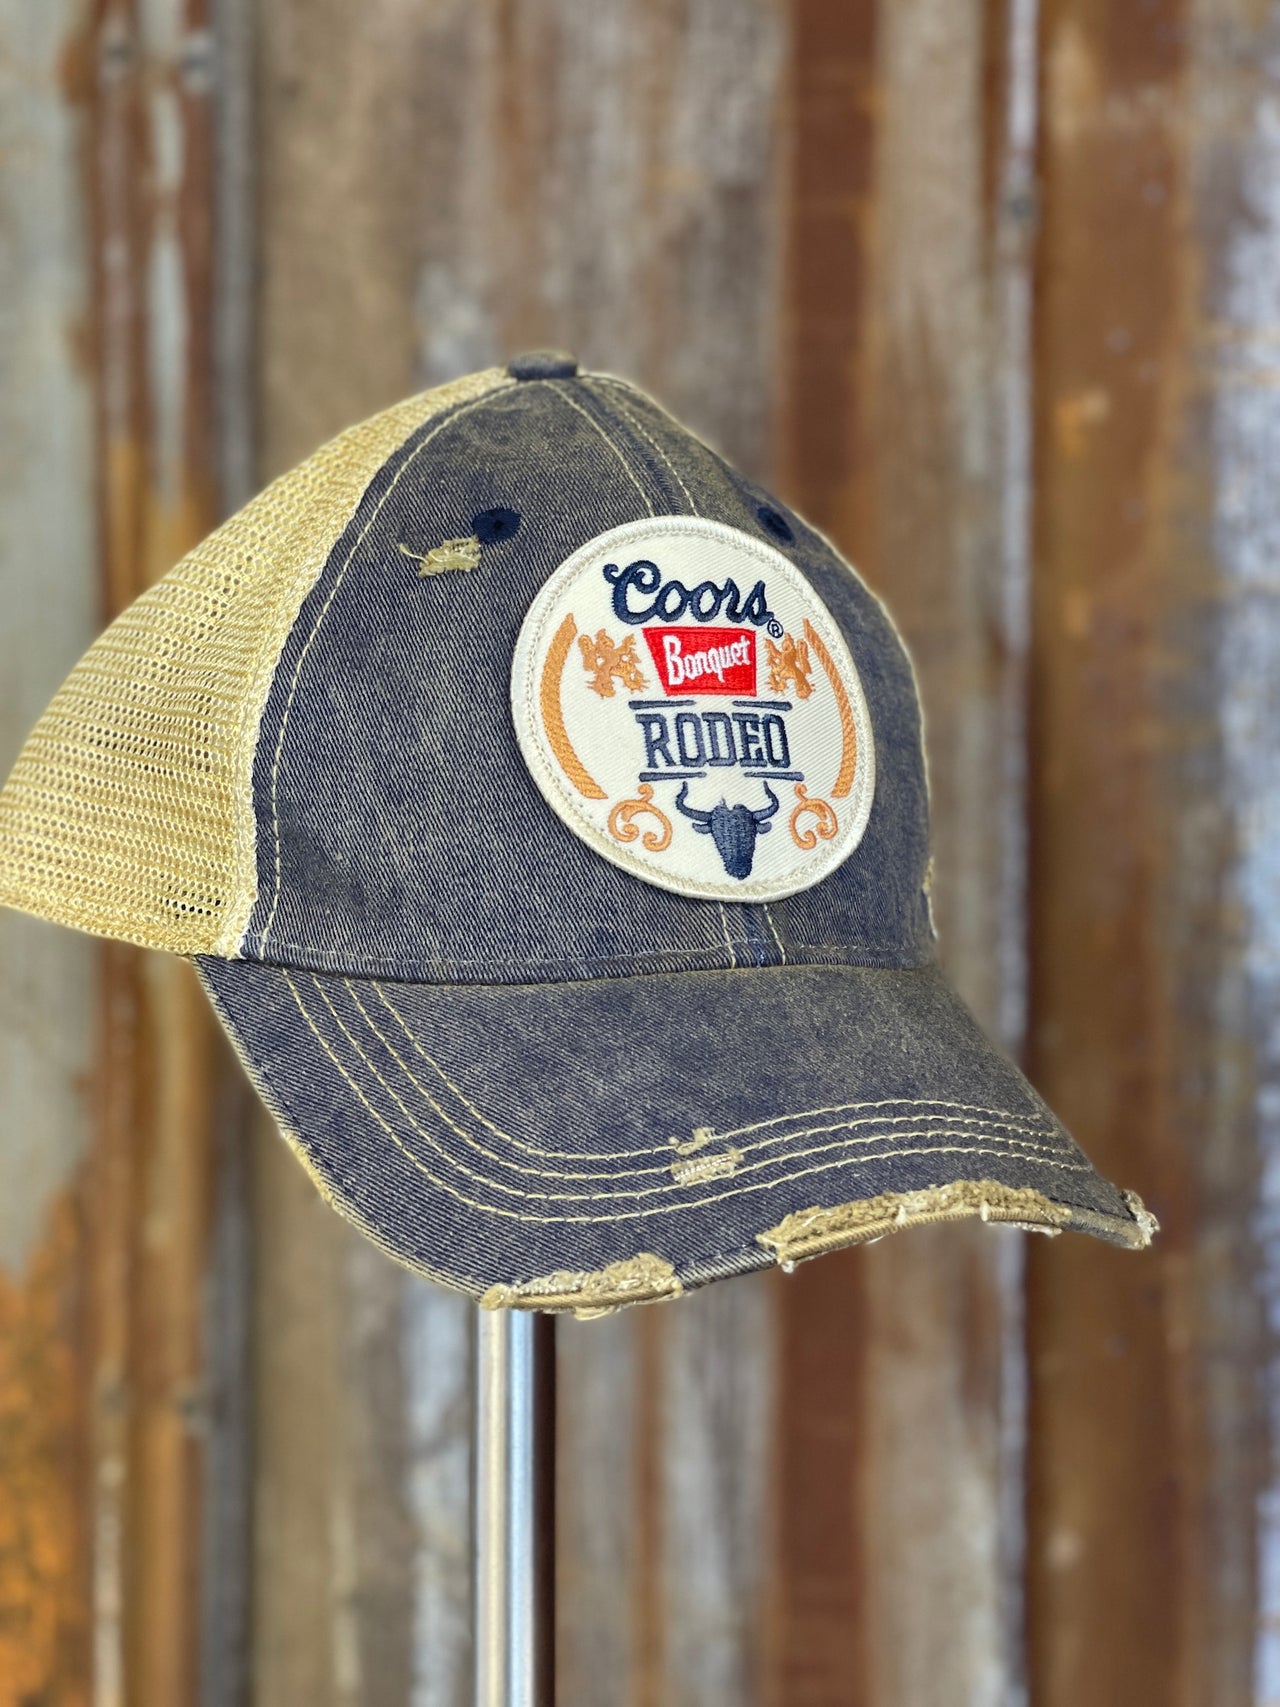 Coors Banquet Rodeo Hat